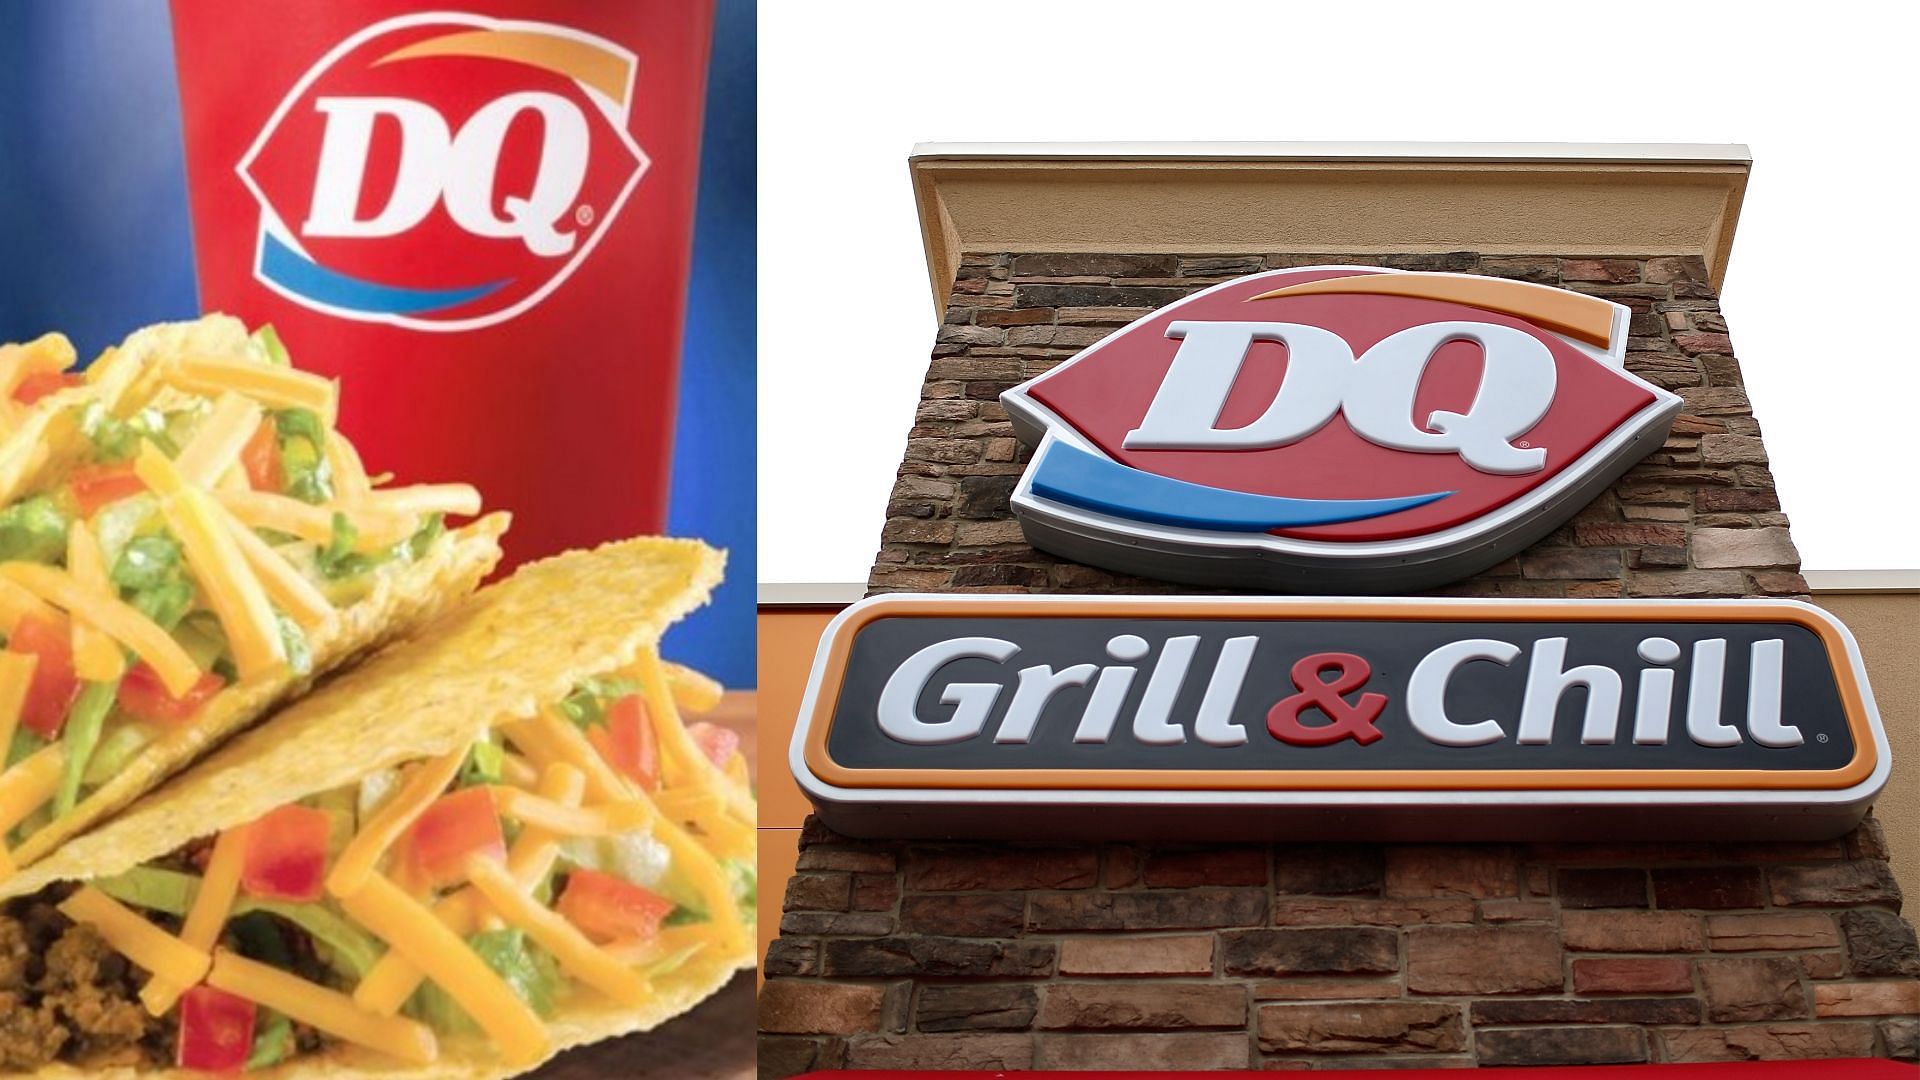 Dairy Queen introduces a month-long three for $5 Taco deal in Texas (Image via Win McNamee/Getty Images)